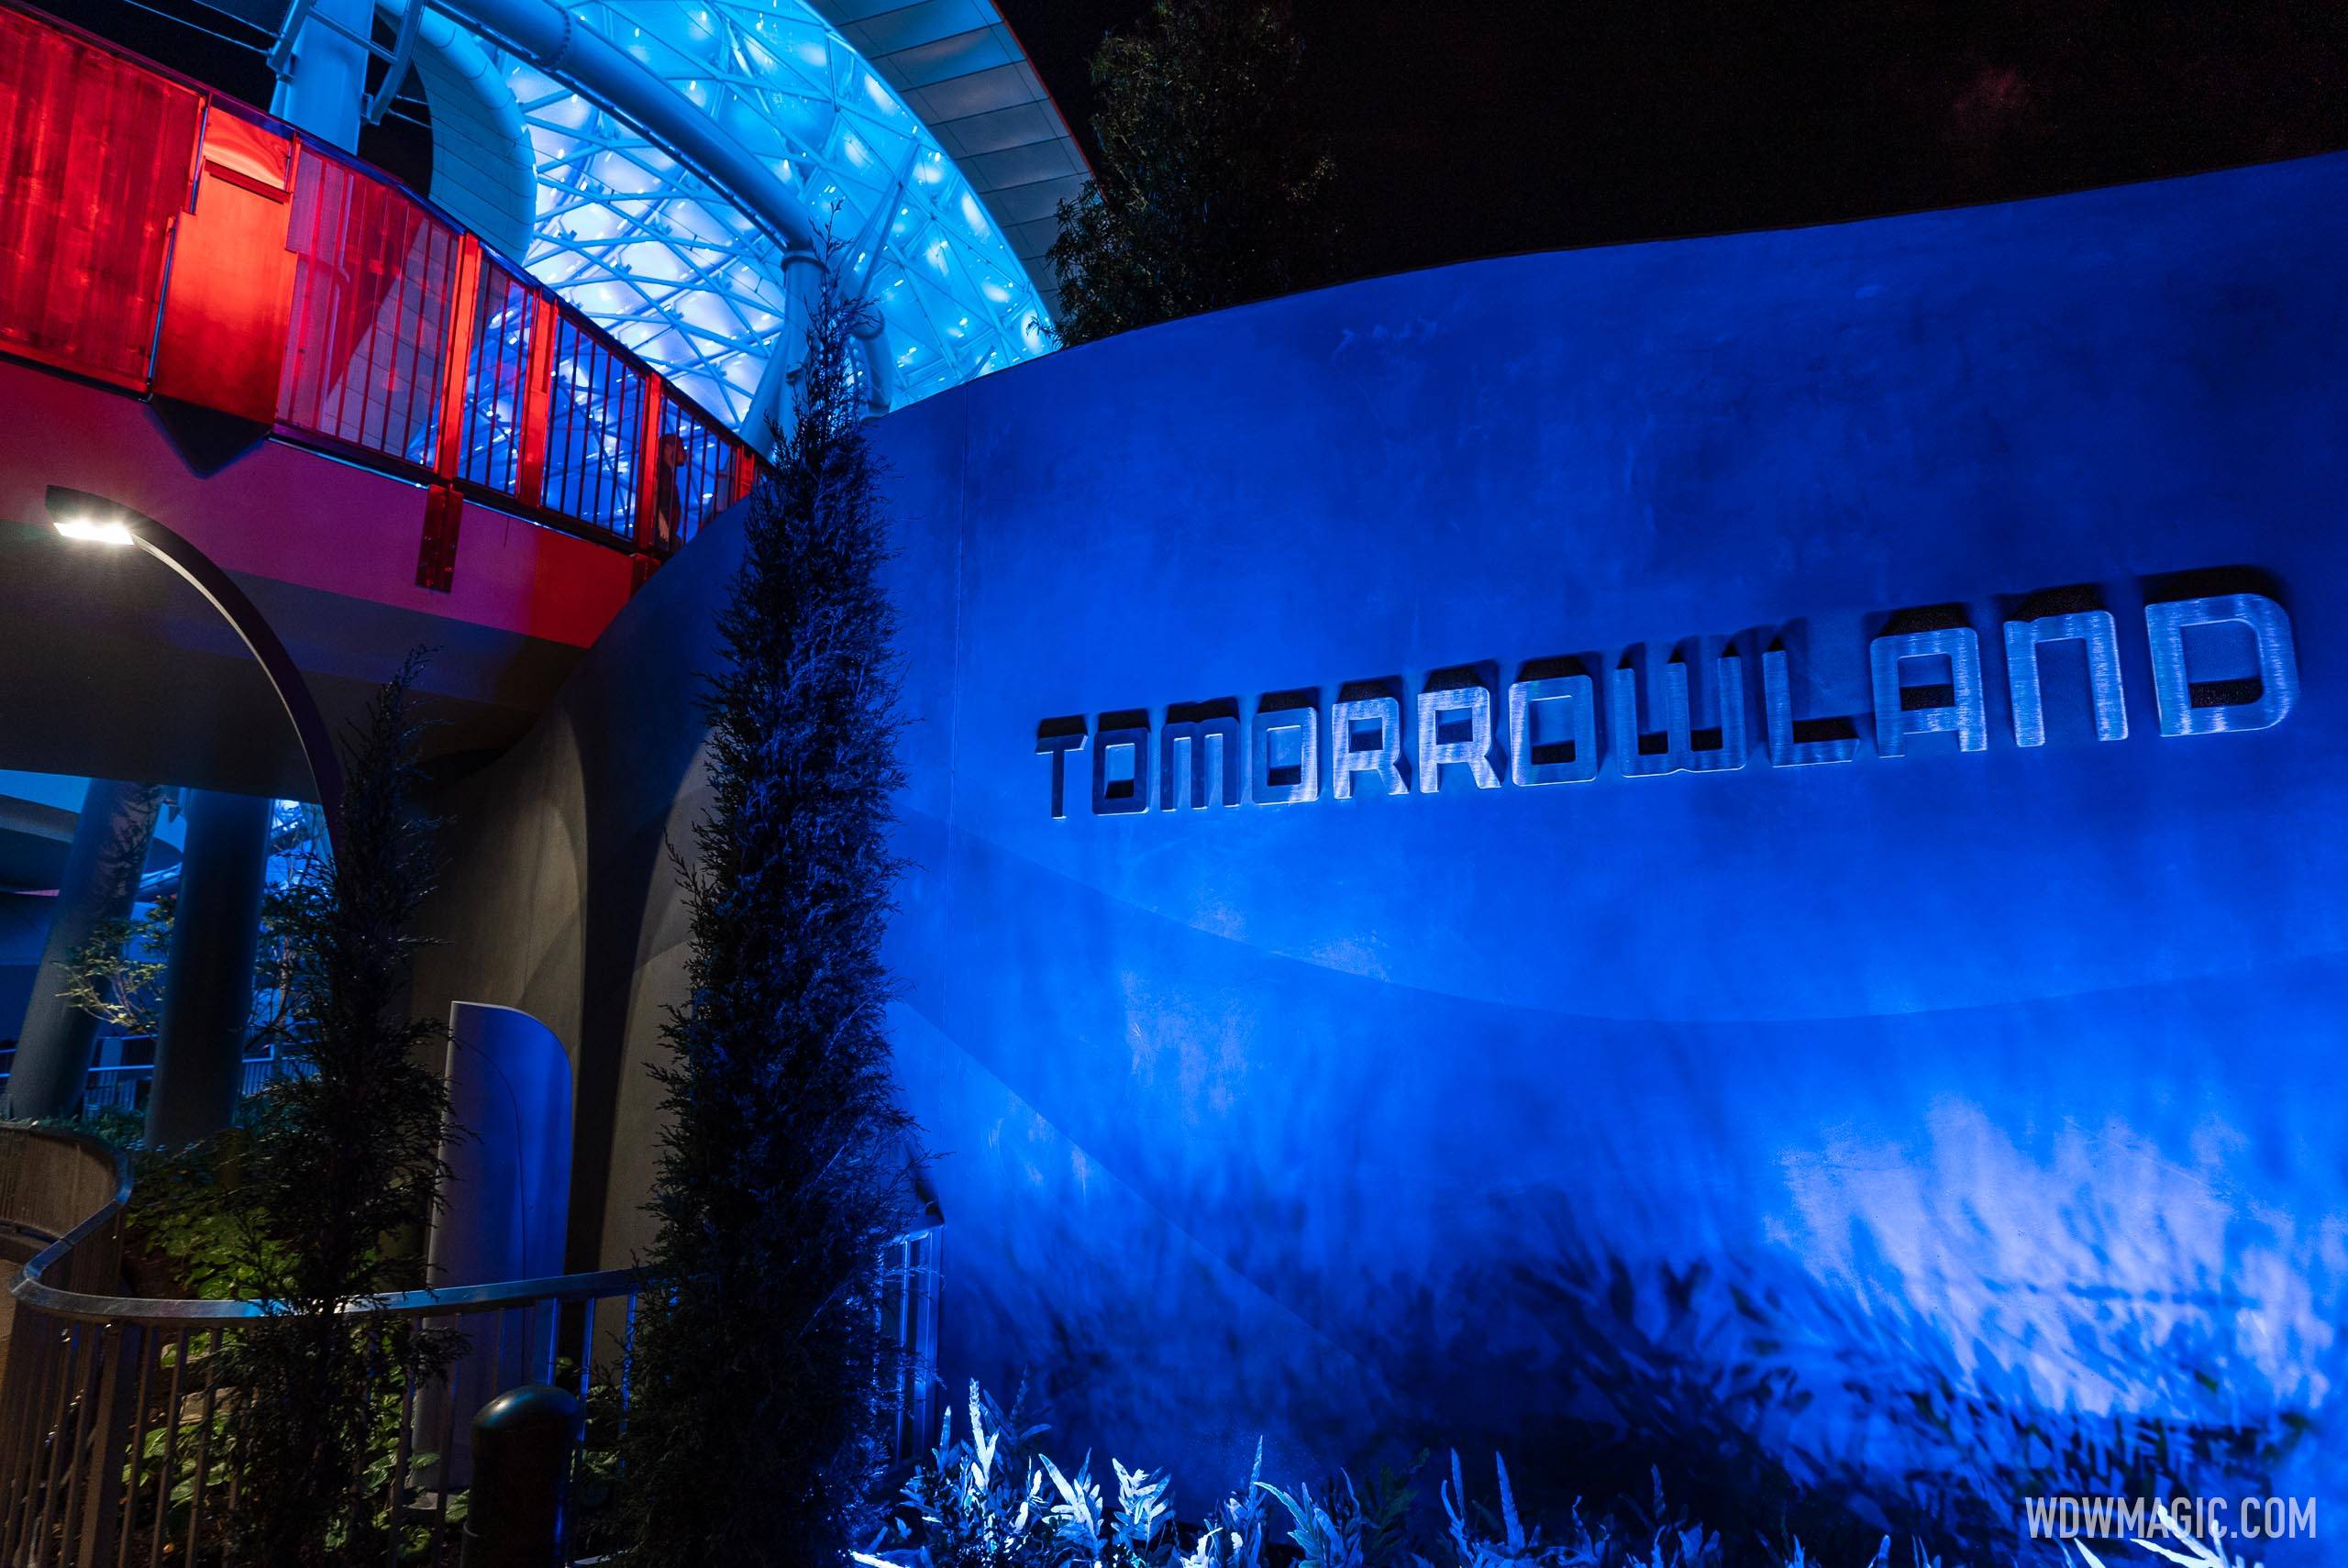 New Tomorrowland sign in Storybook Circus heading towards TRON